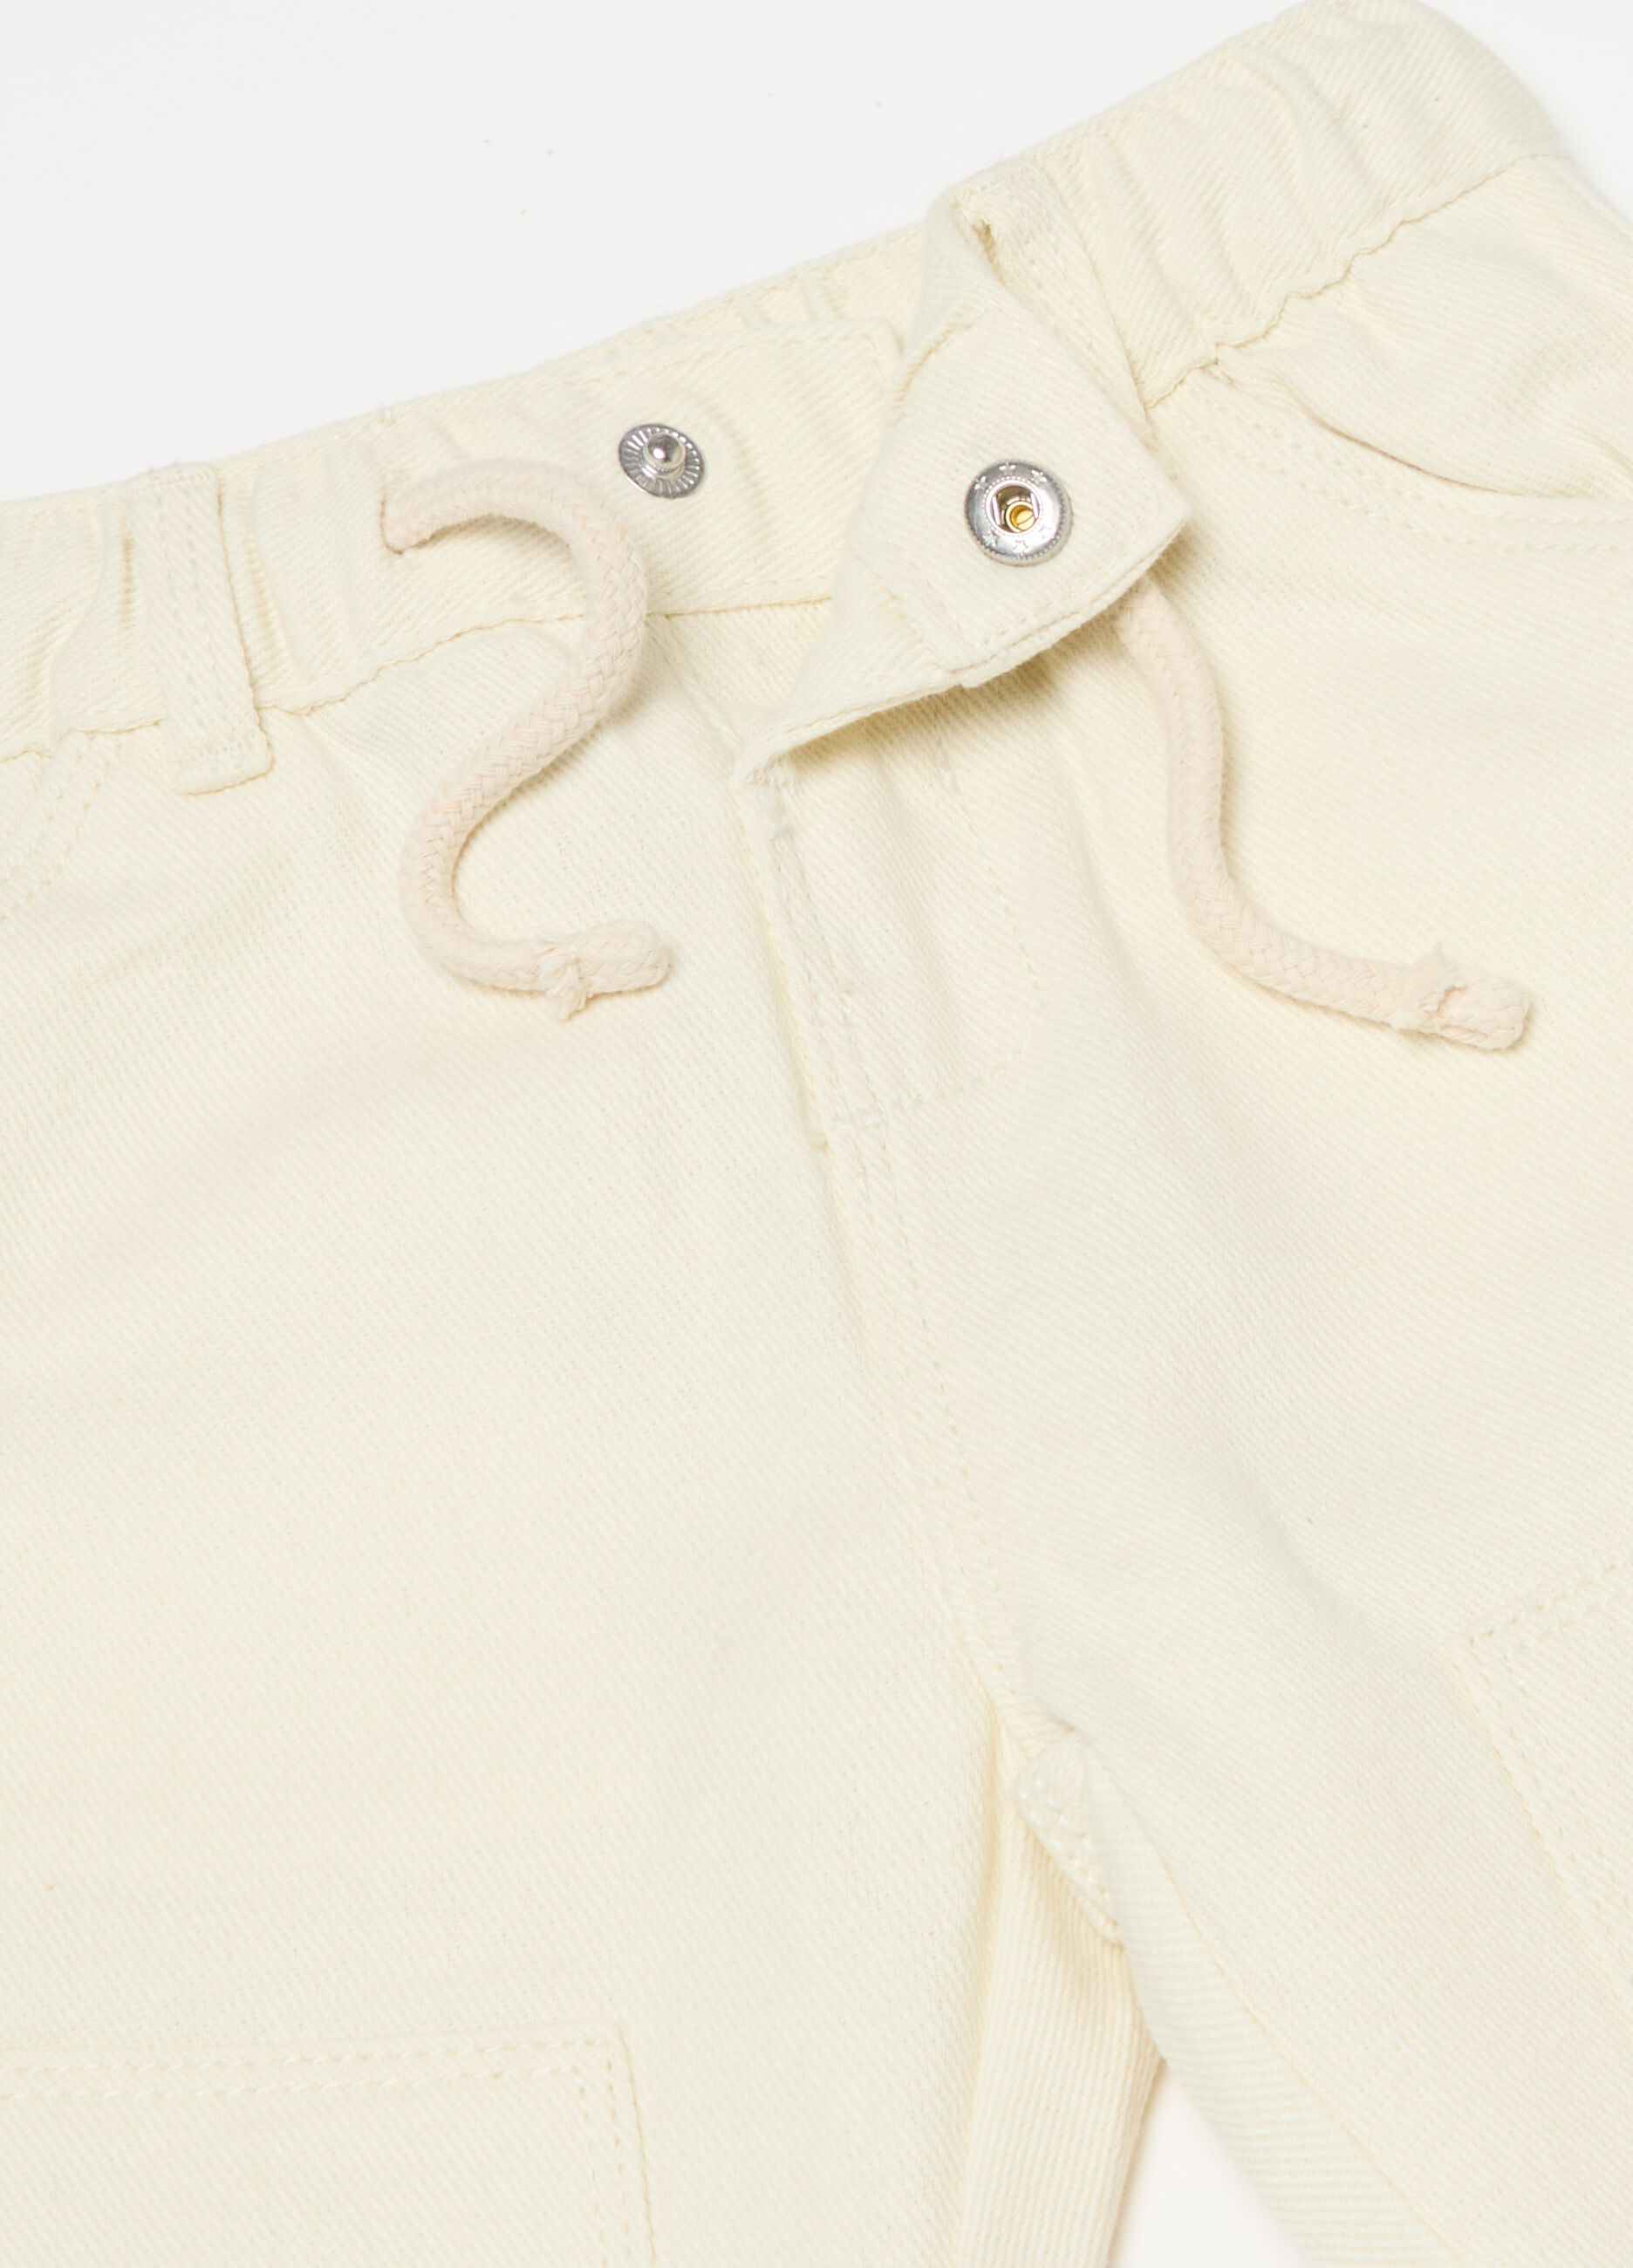 Cotton and linen drawstring trousers